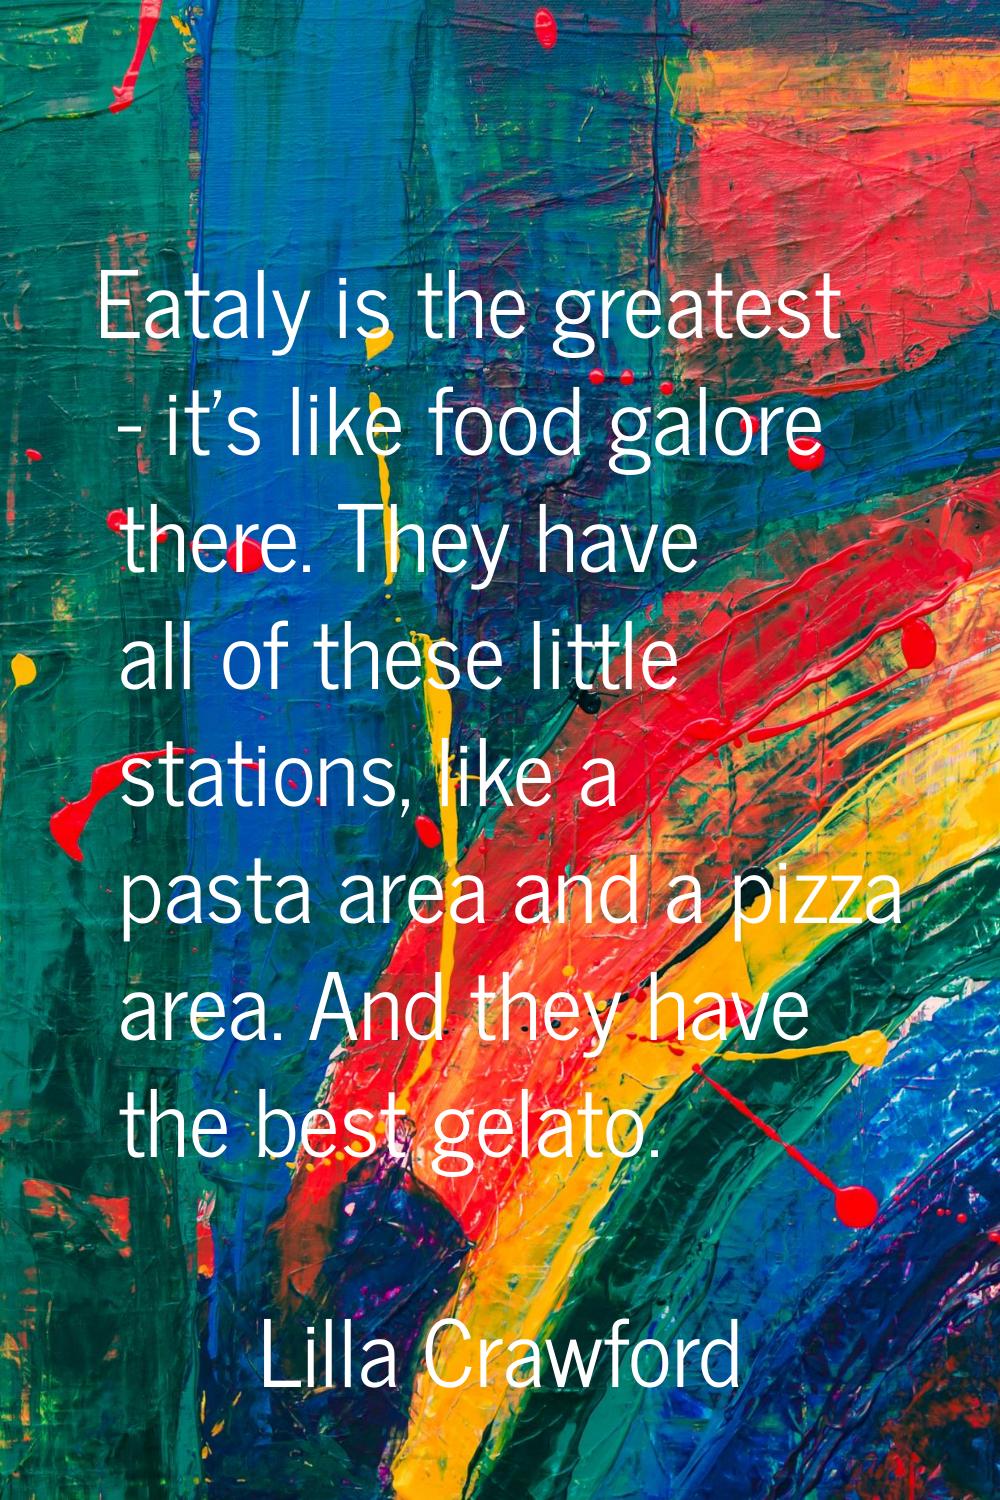 Eataly is the greatest - it's like food galore there. They have all of these little stations, like 